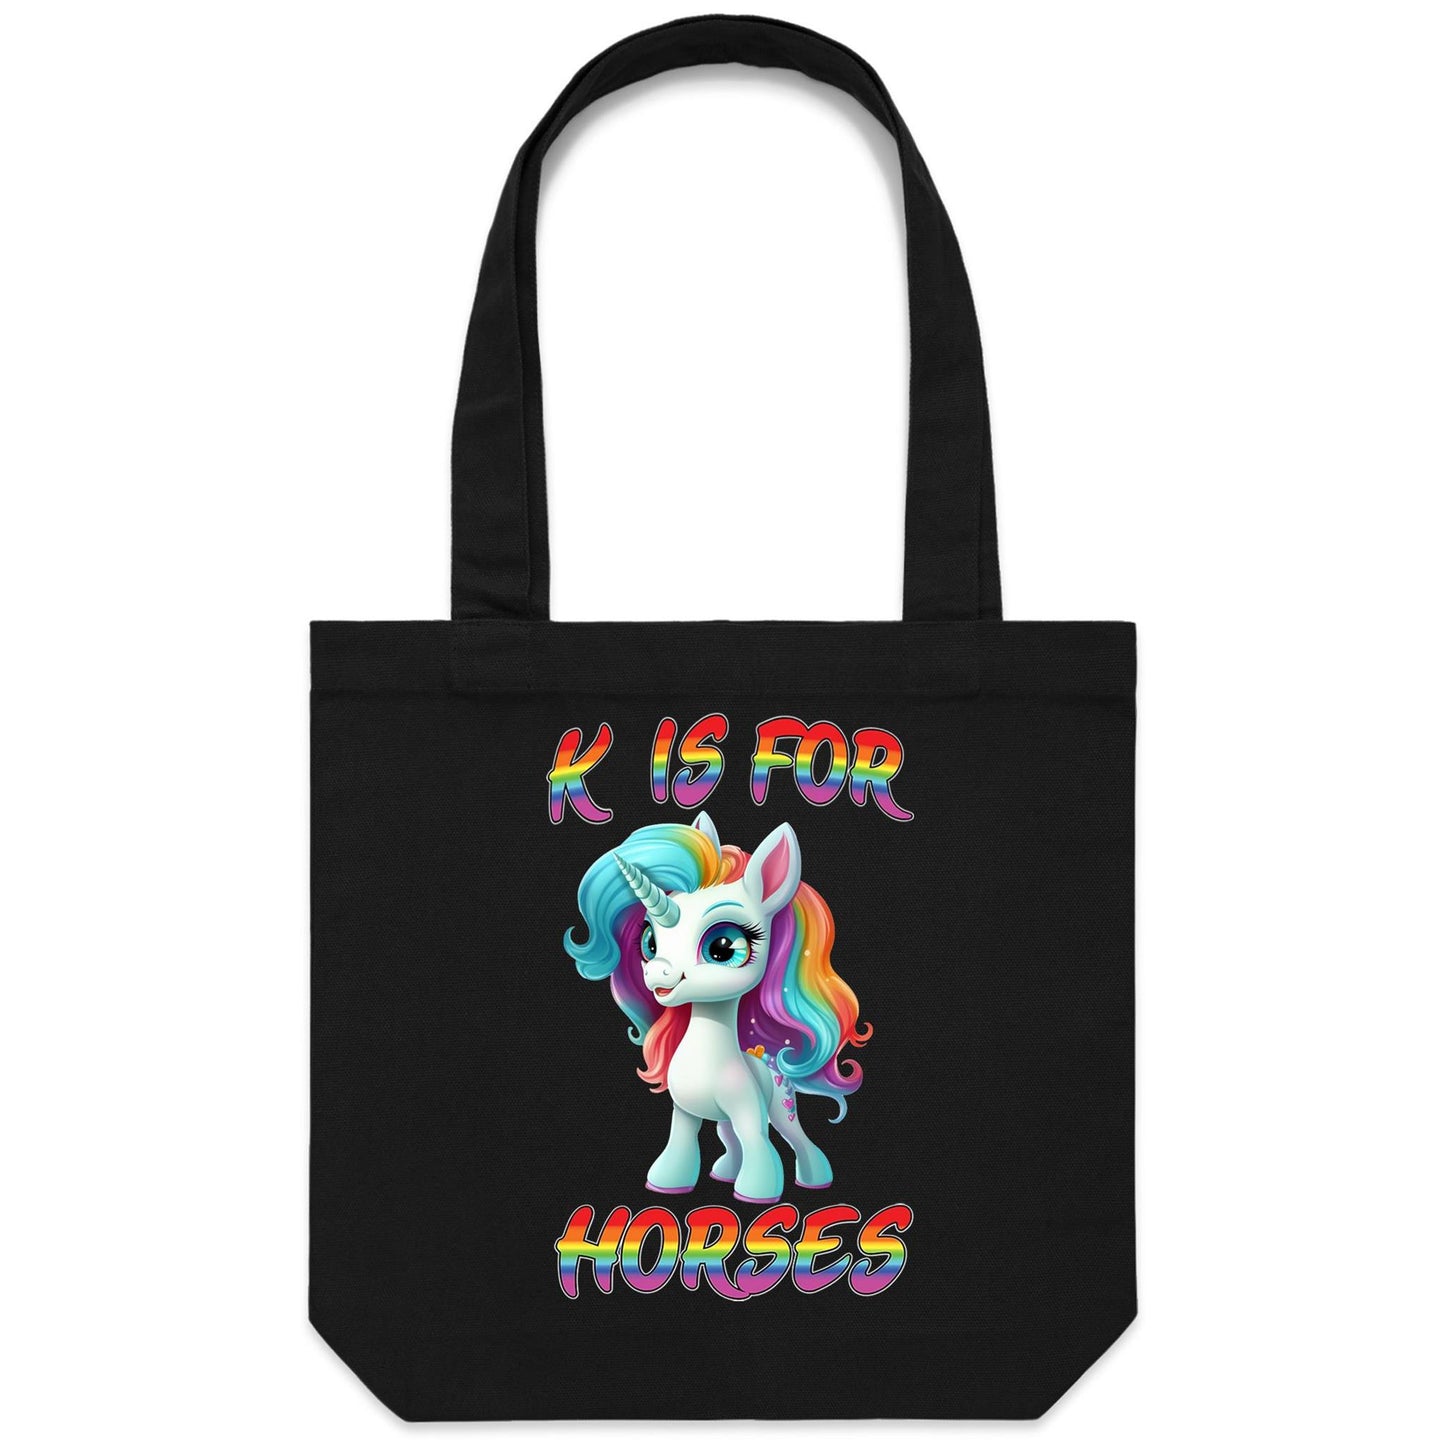 AS Colour - Carrie - Canvas Tote Bag